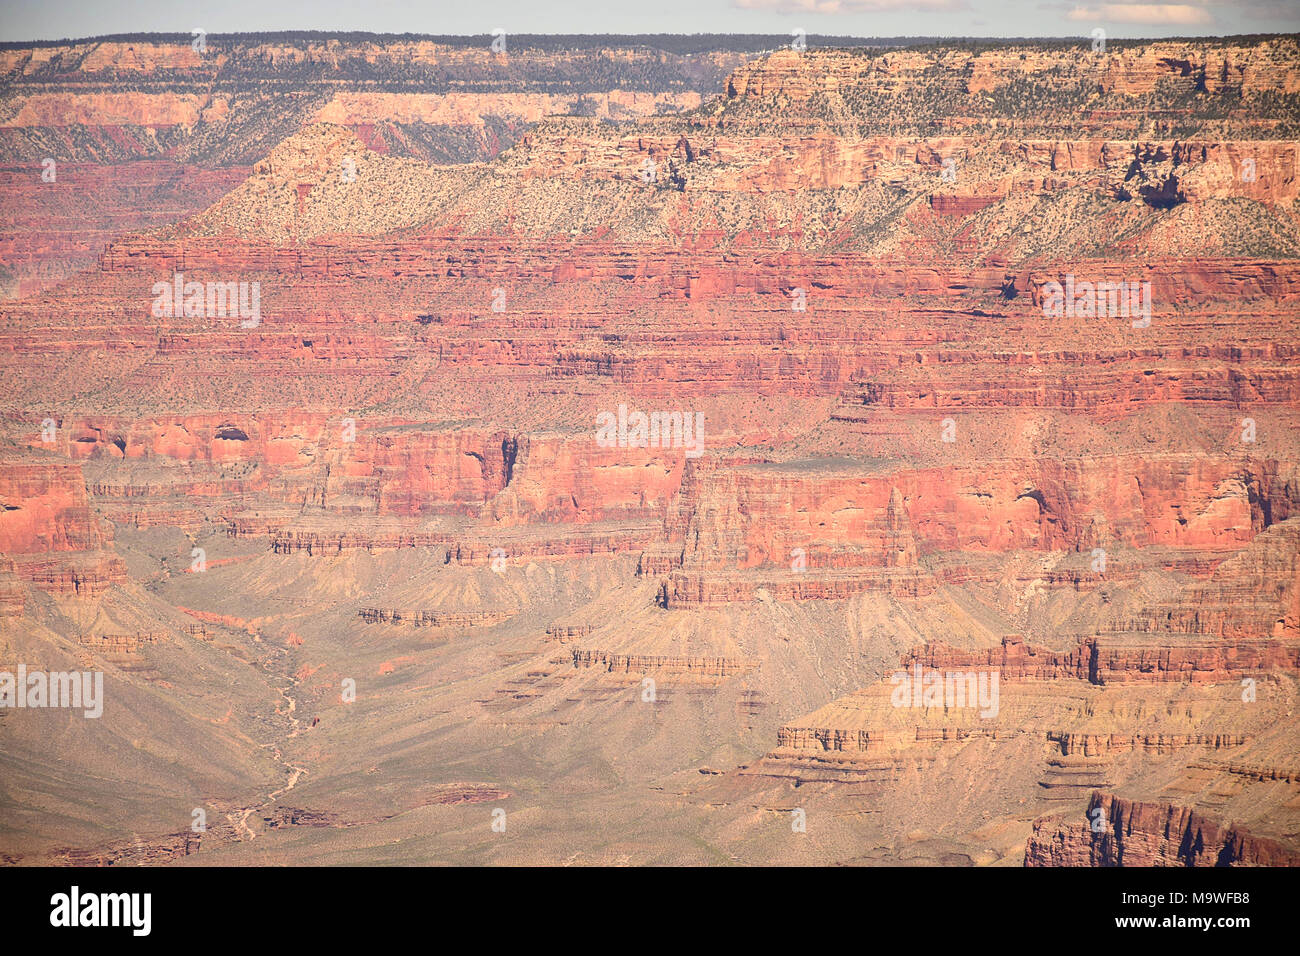 Landscape of the Grand Canyon National Park, USA Stock Photo